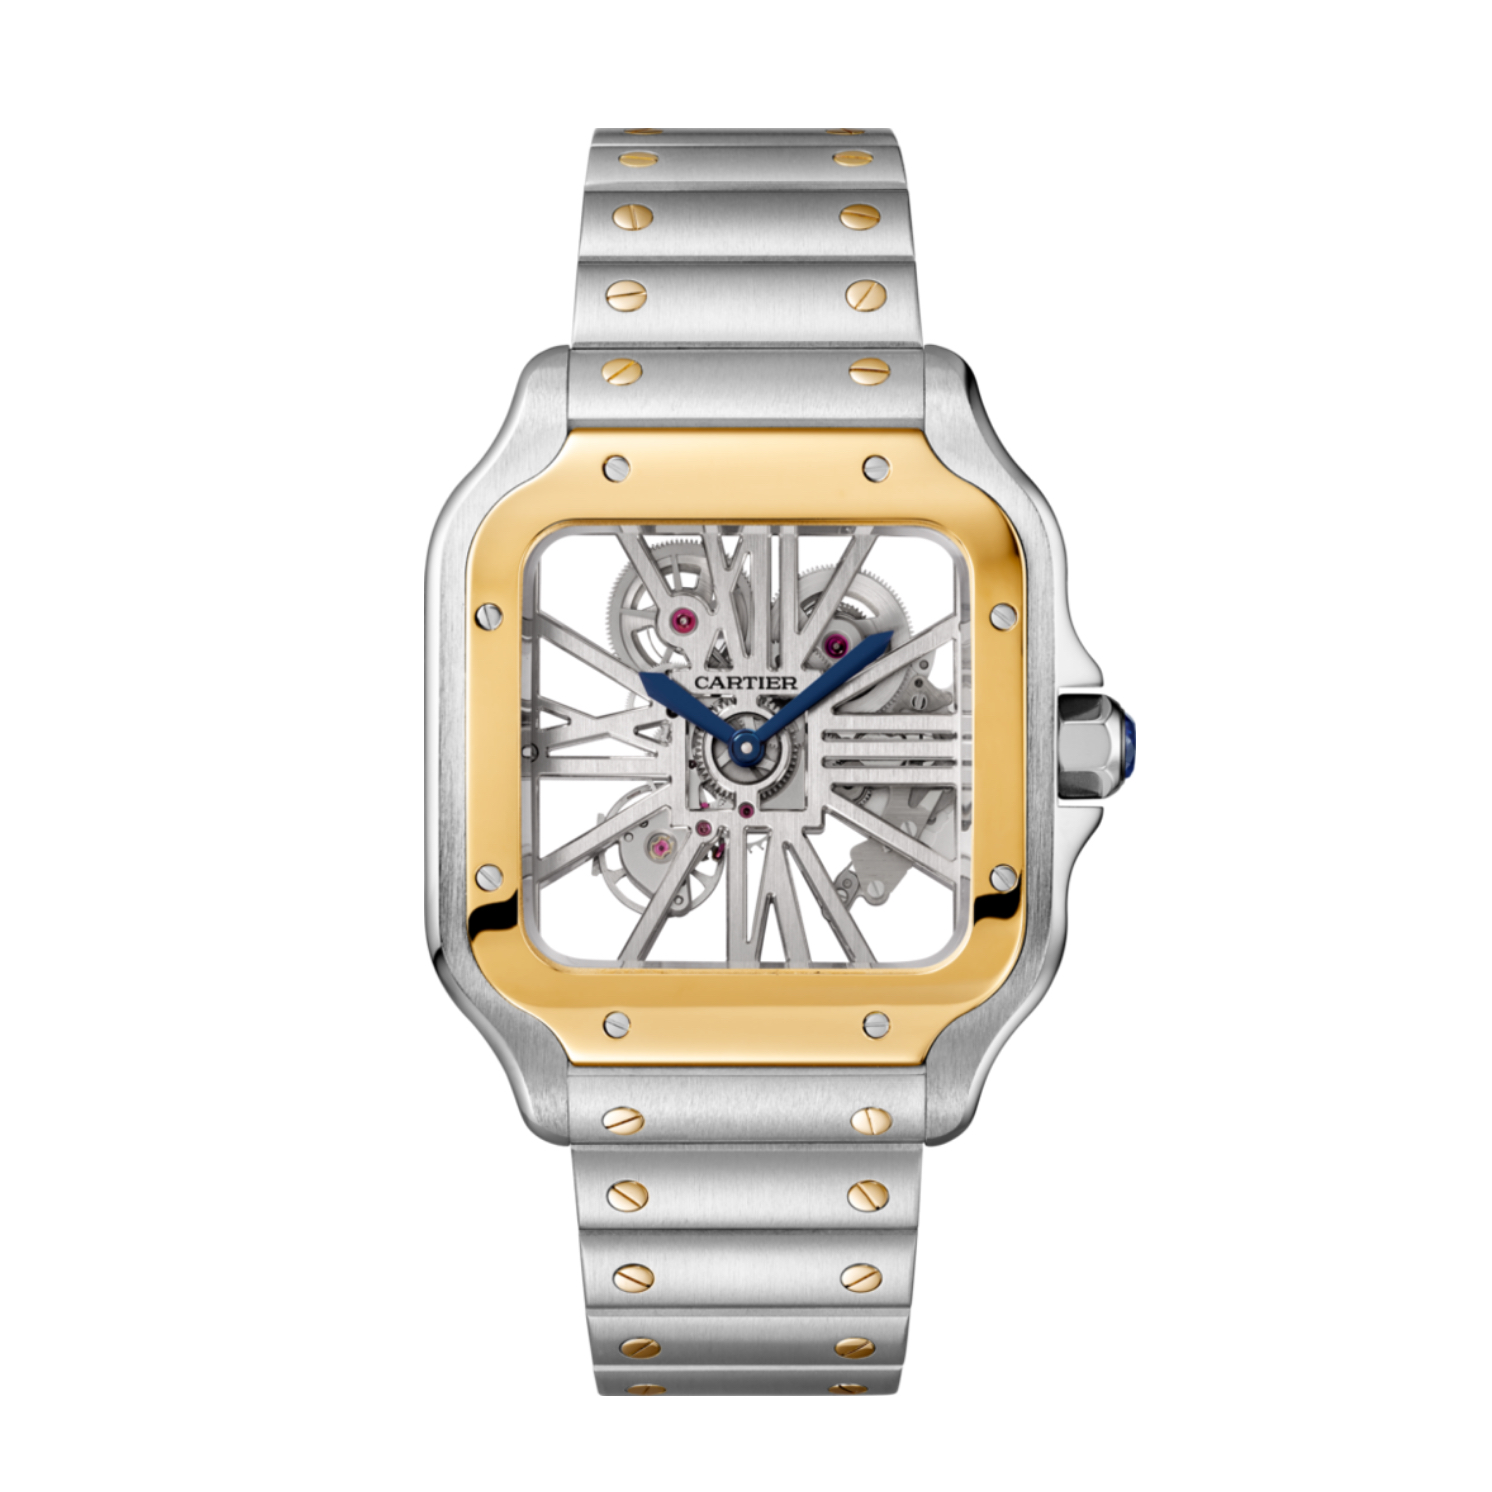 Picture of SANTOS DE CARTIER SKELETON - YELLOW GOLD & STEEL HAND-WOUND LARGE